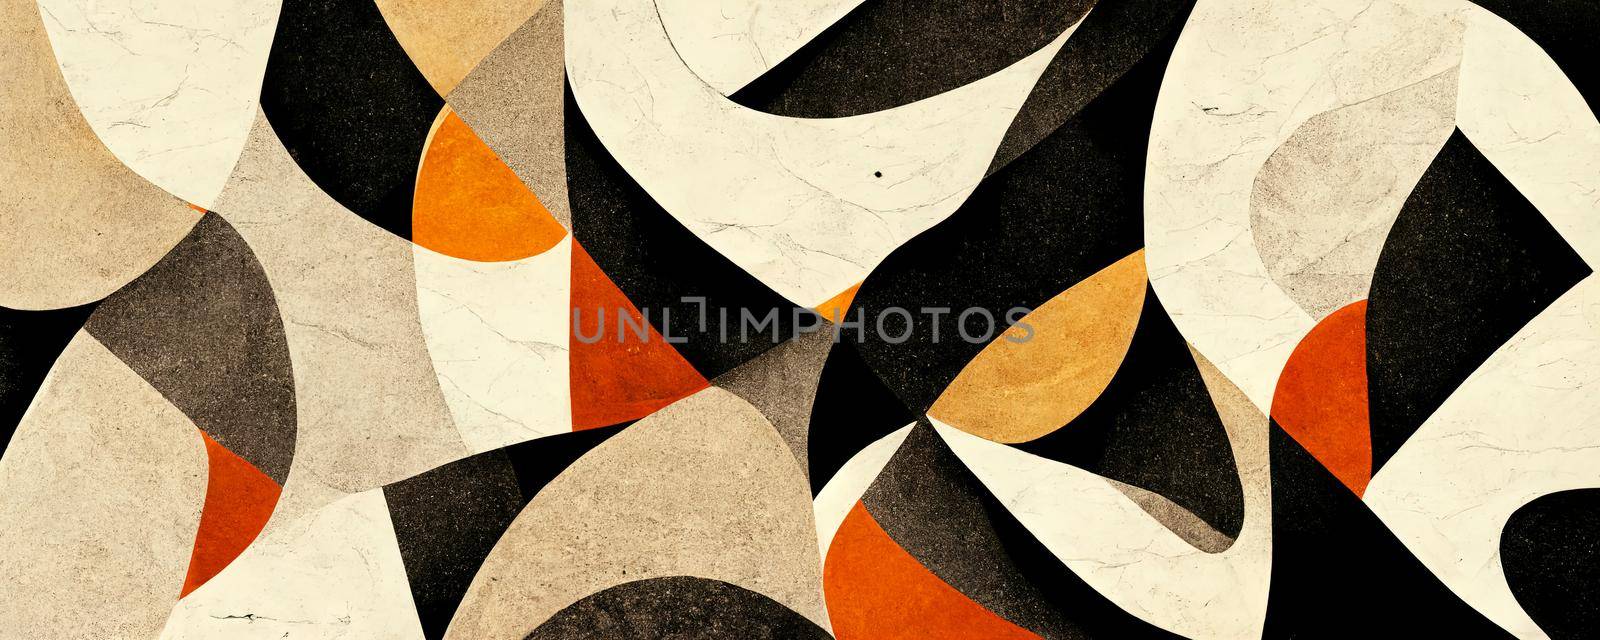 Colorful abstract wallpaper texture background illustration by TRMK